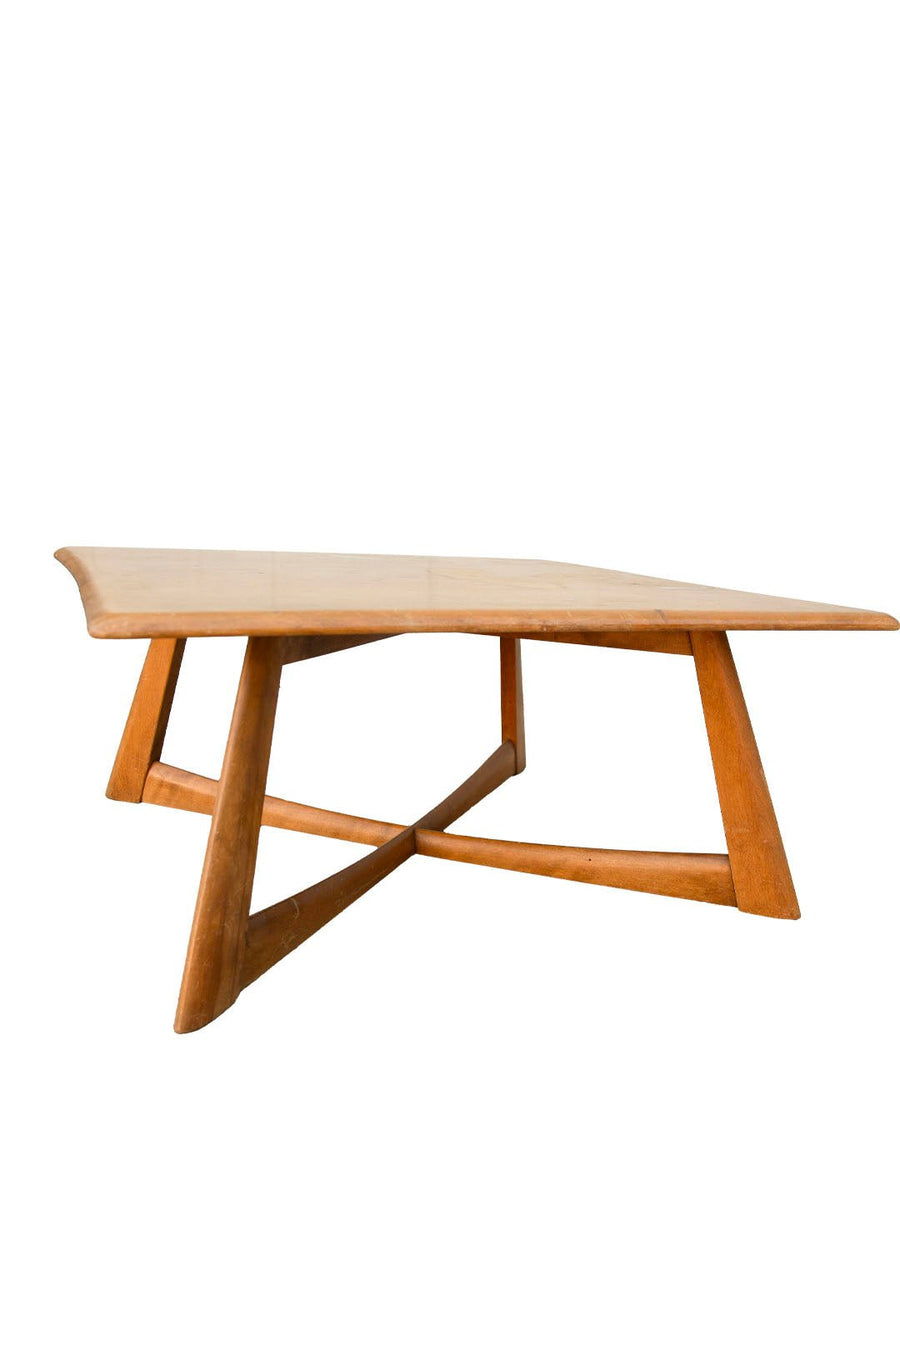 Heywood Wakefield Mid Century Blonde X Base Square Coffee Table - Burning Torch Online Boutique